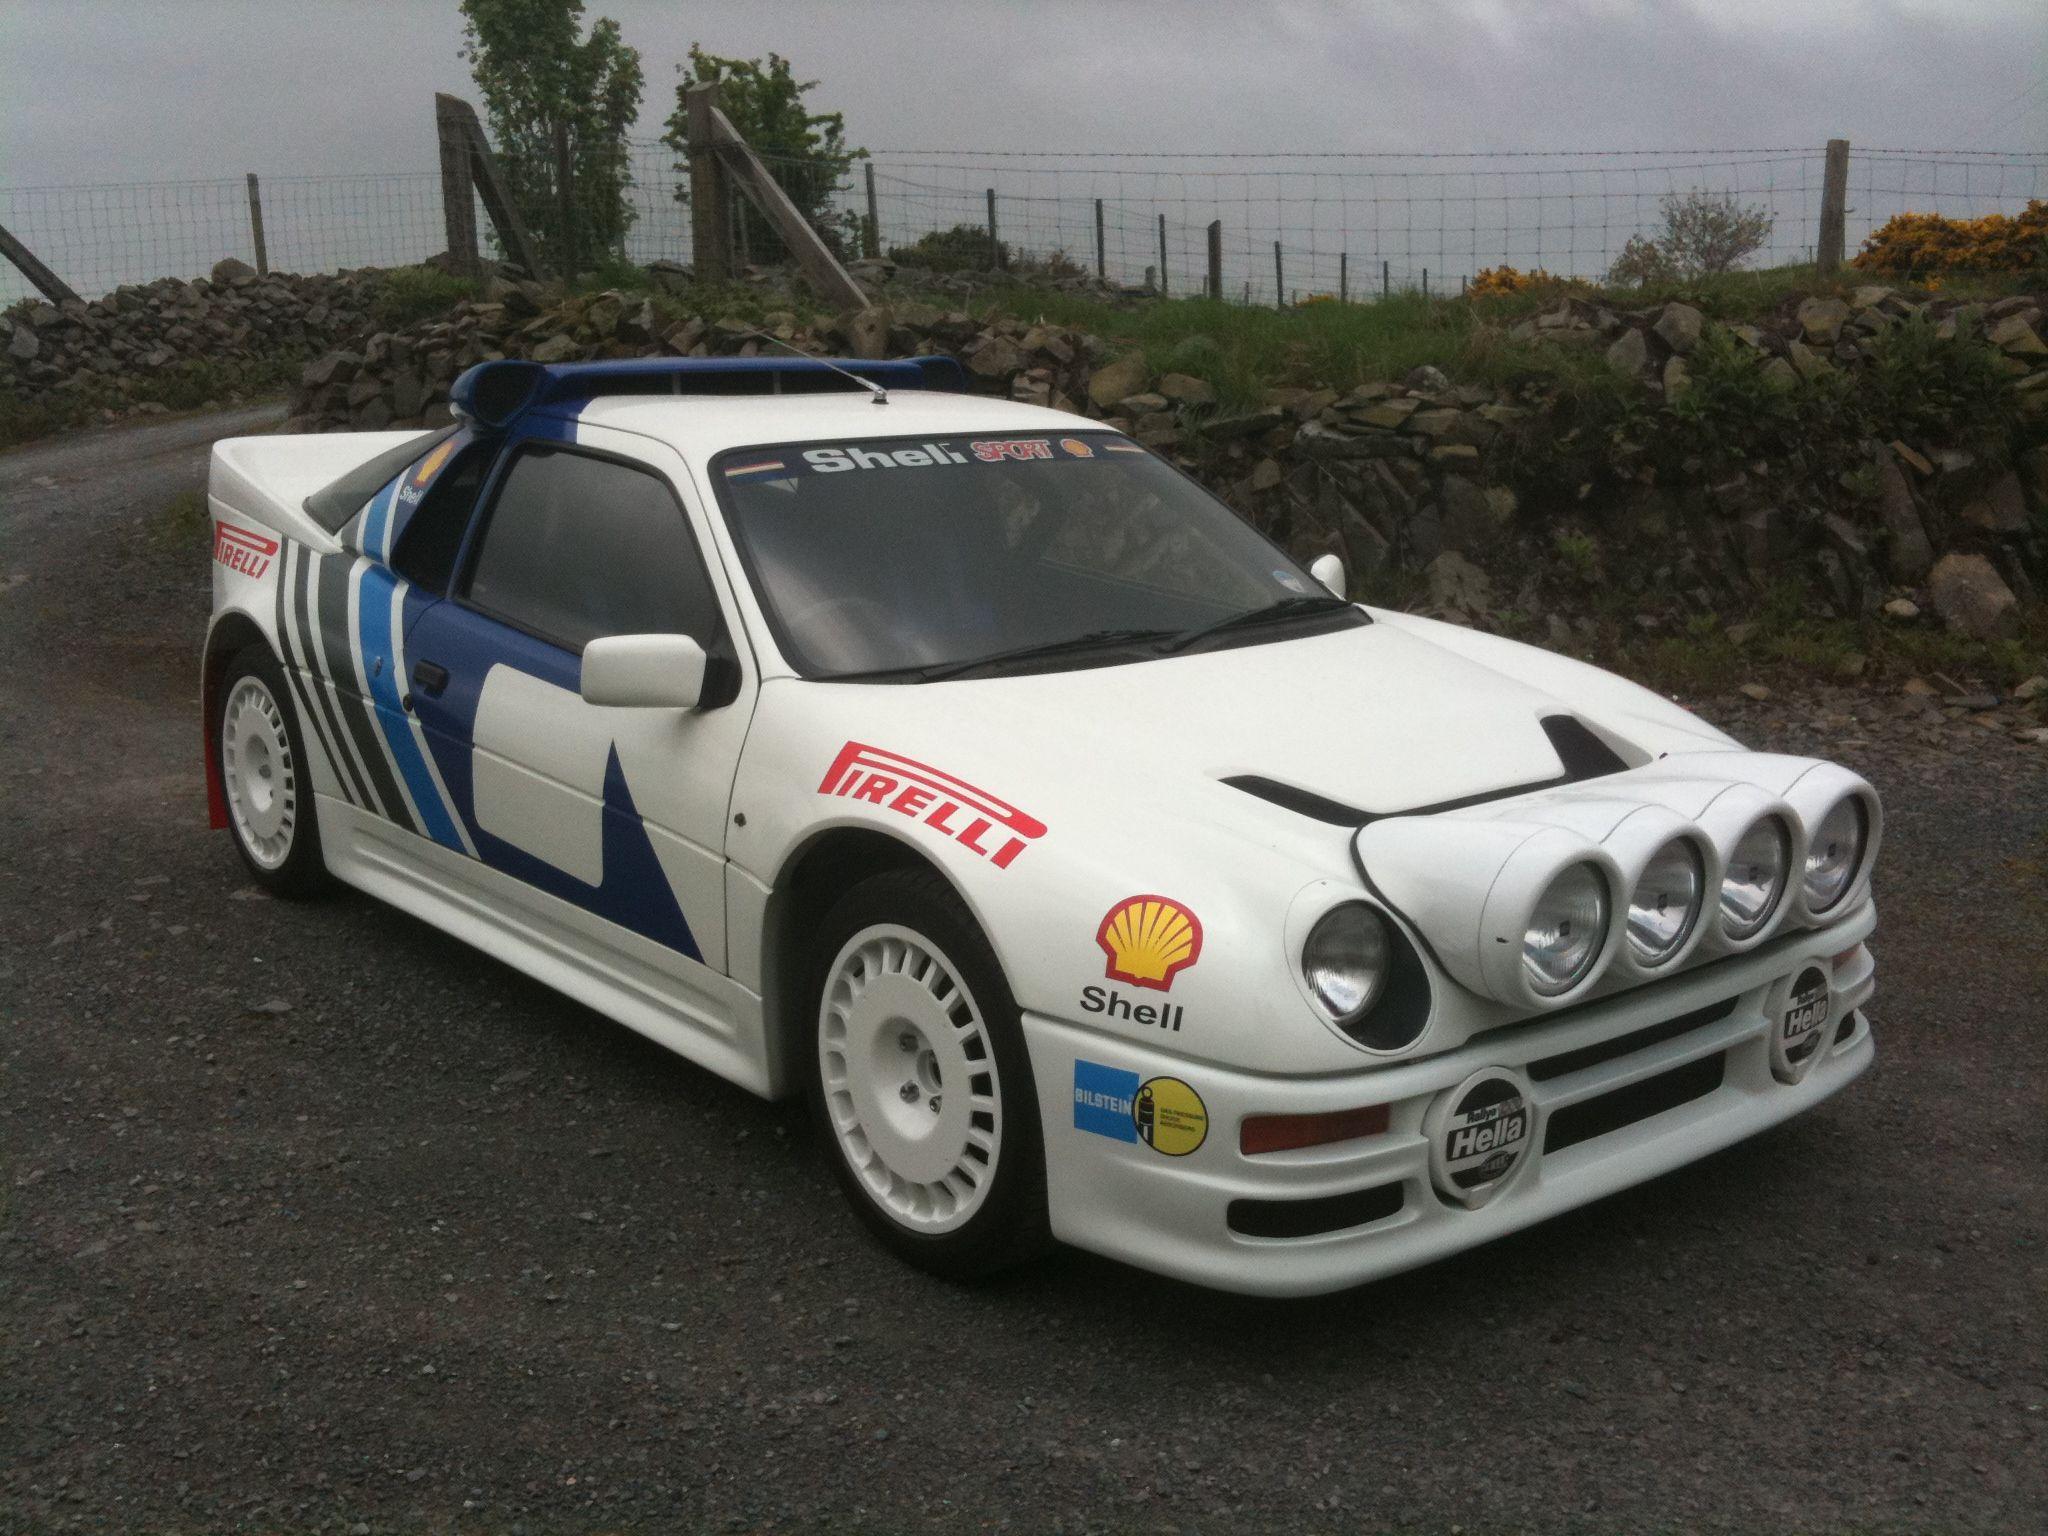 My Ford RS200 replica, with rally livery